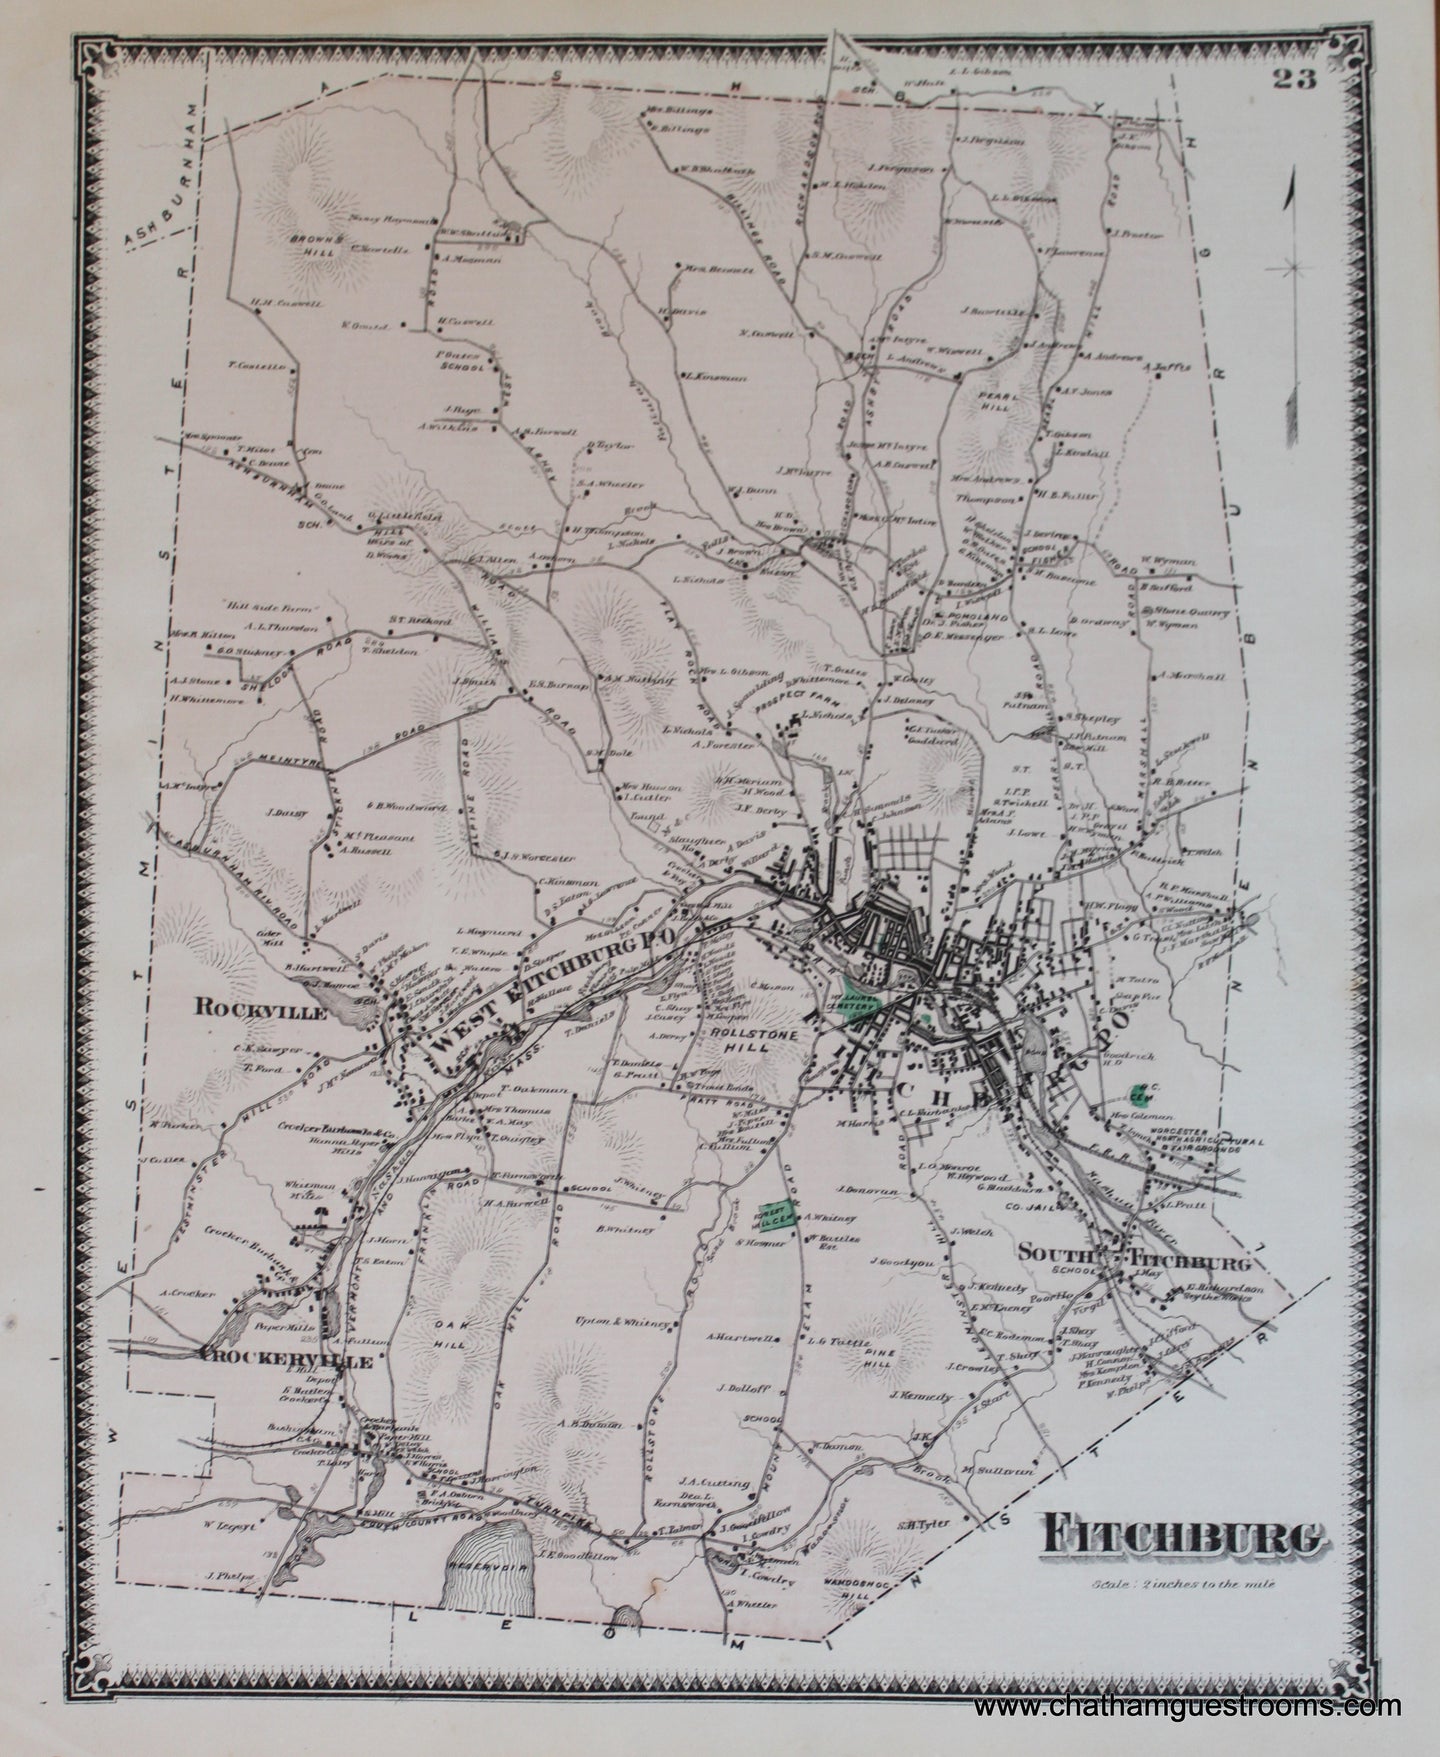 Antique-Hand-Colored-Map-Fitchburg-p.-23-(MA)-Massachusetts-Worcester-County-1870-Beers-Maps-Of-Antiquity